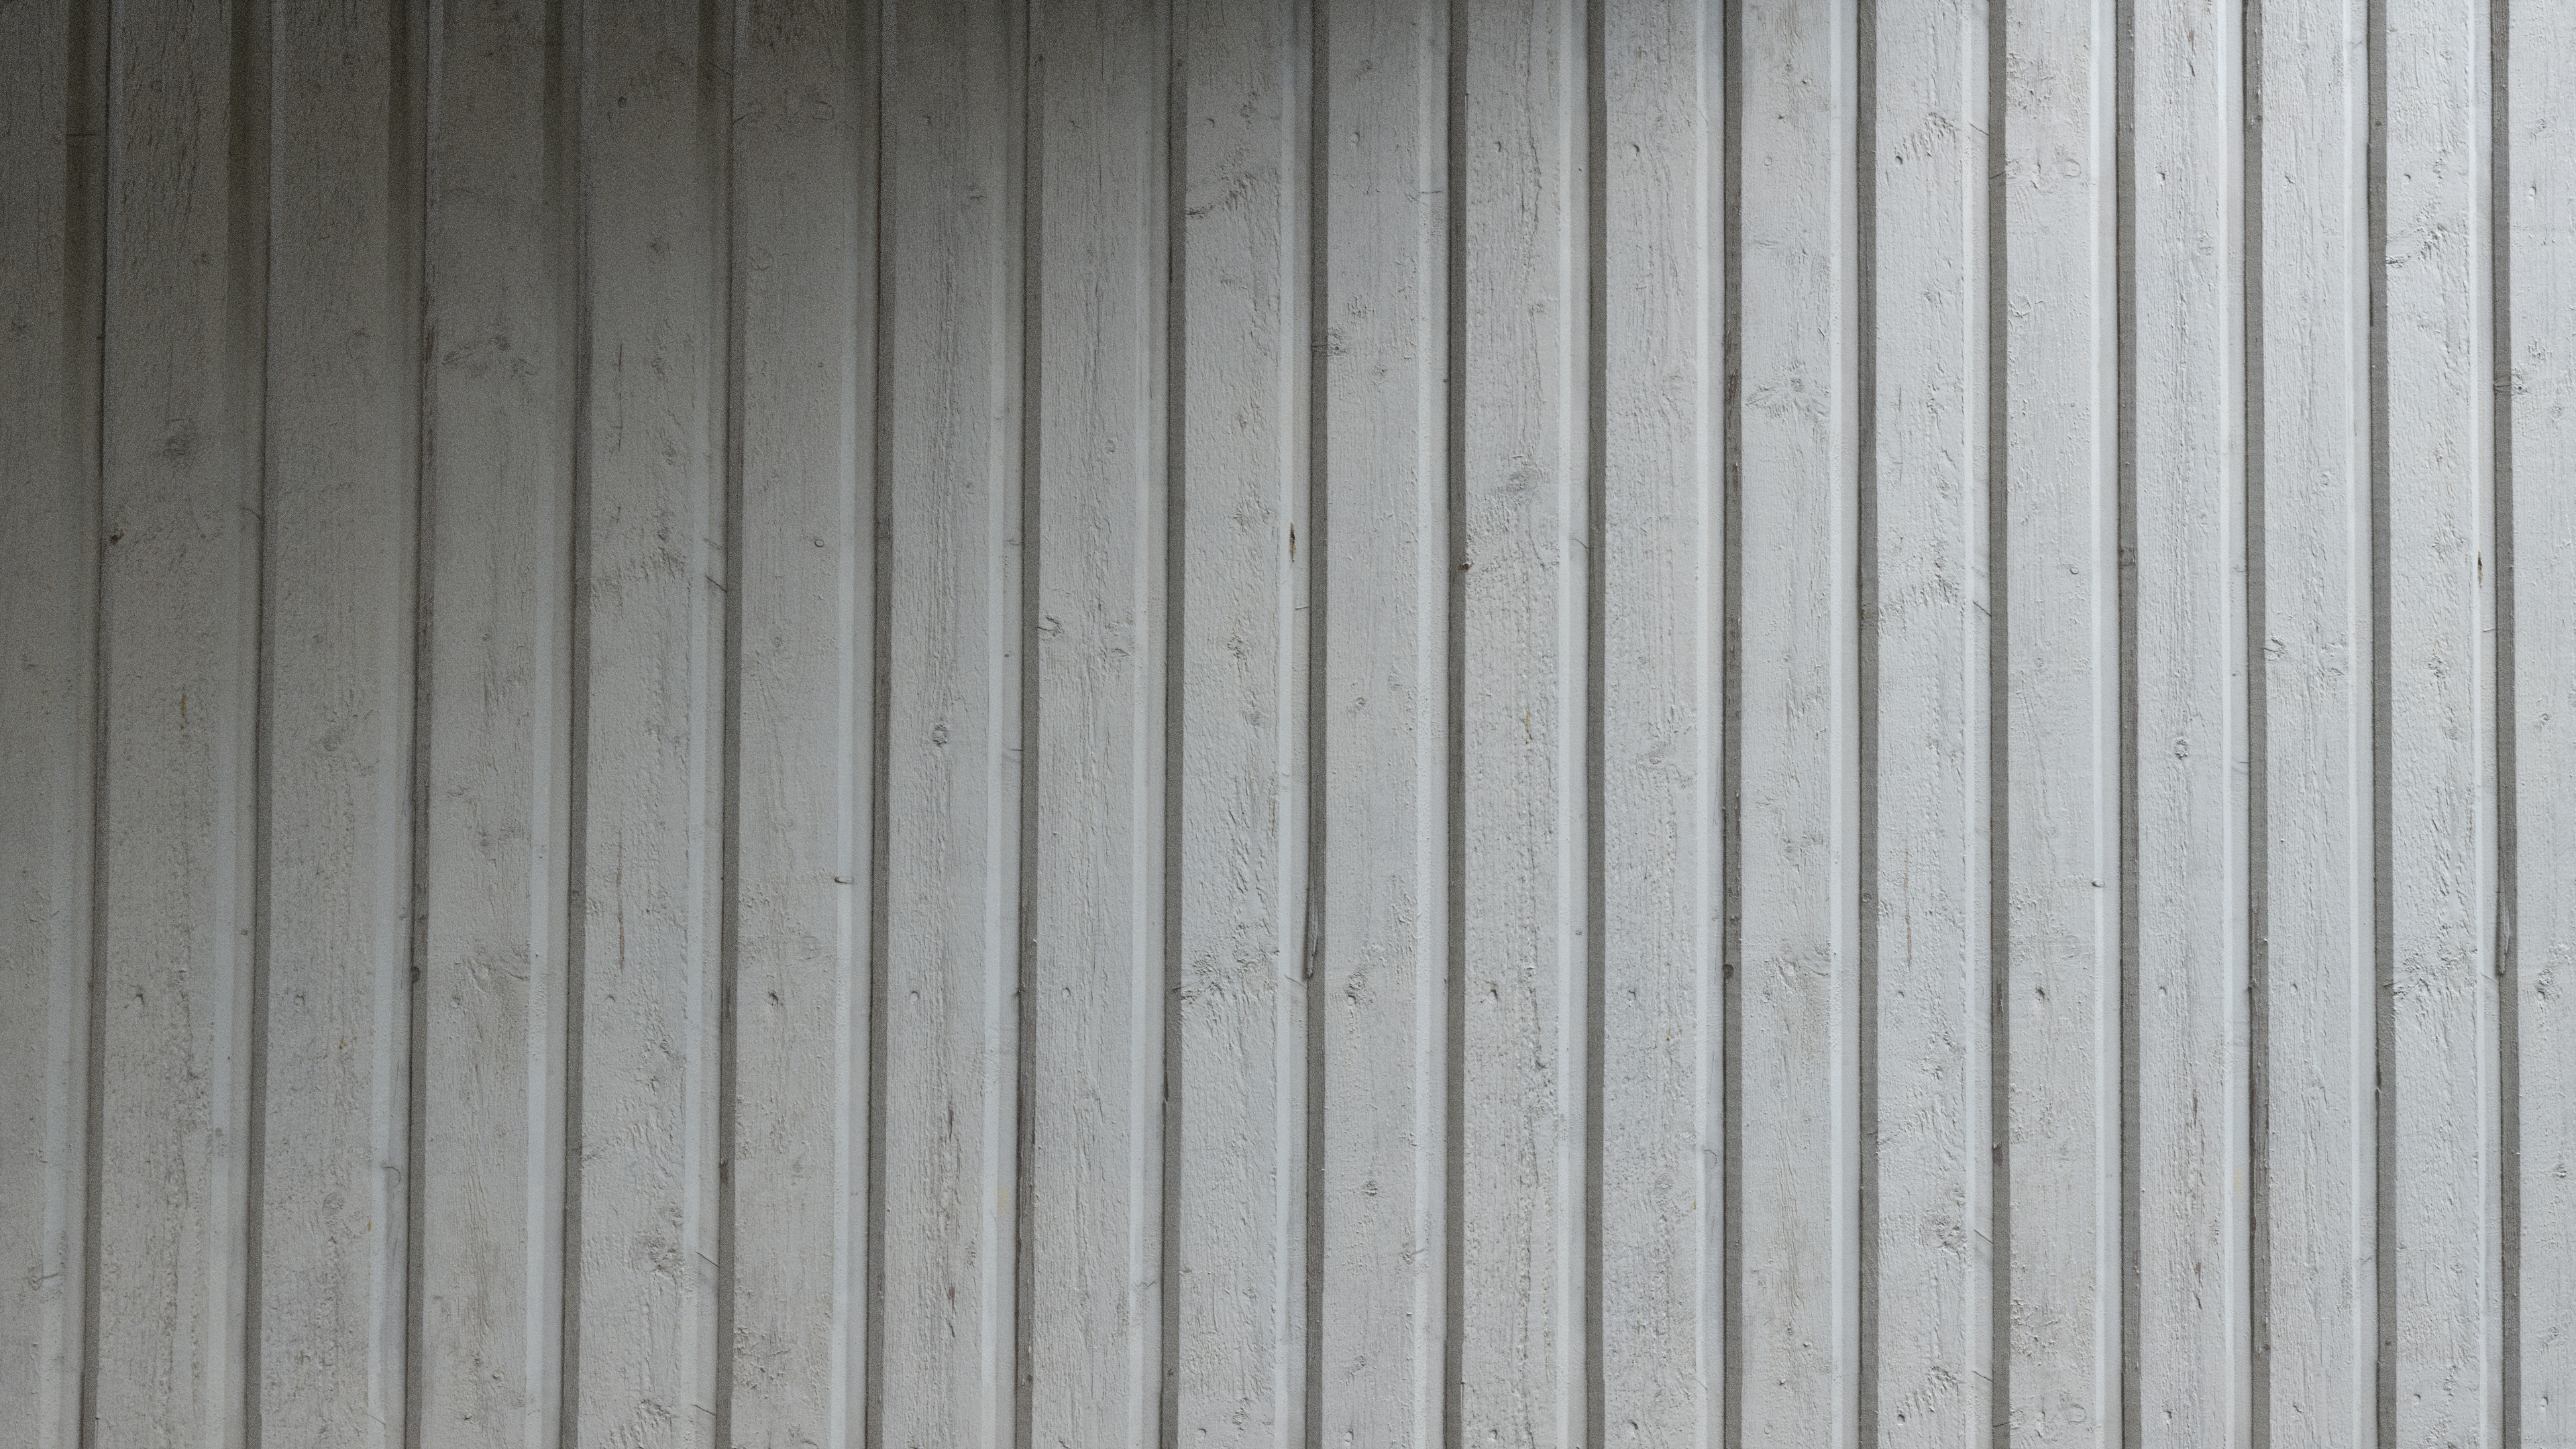 3D Scanned White Painted Wood Siding 1x1 meters